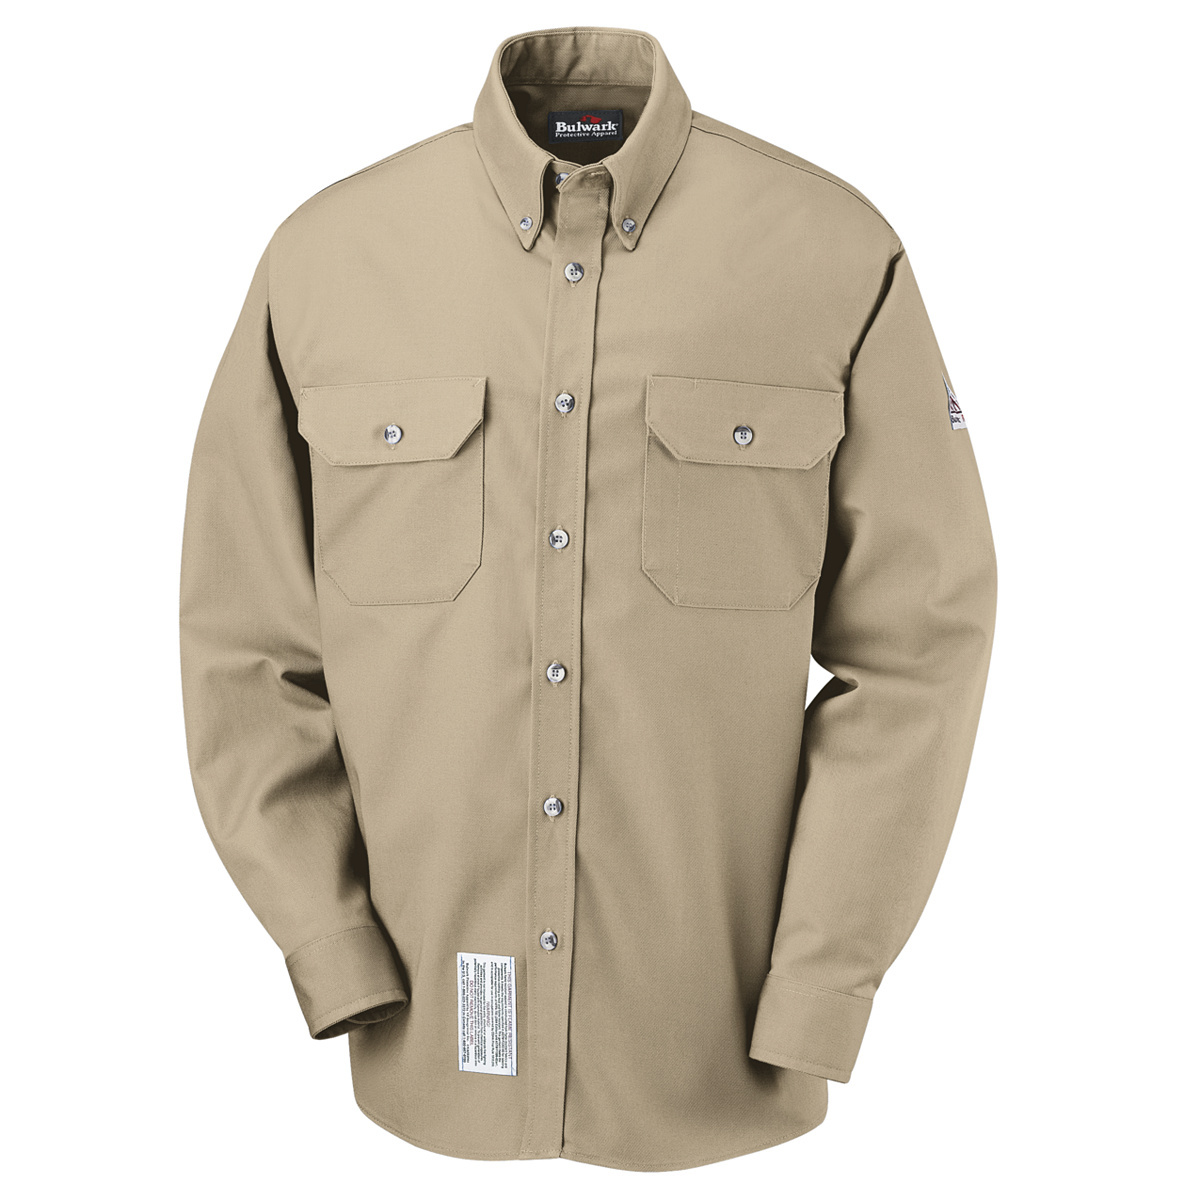 Bulwark® Small Tall Khaki Westex Ultrasoft®/Cotton/Nylon Flame Resistant Dress Shirt With Button Front Closure